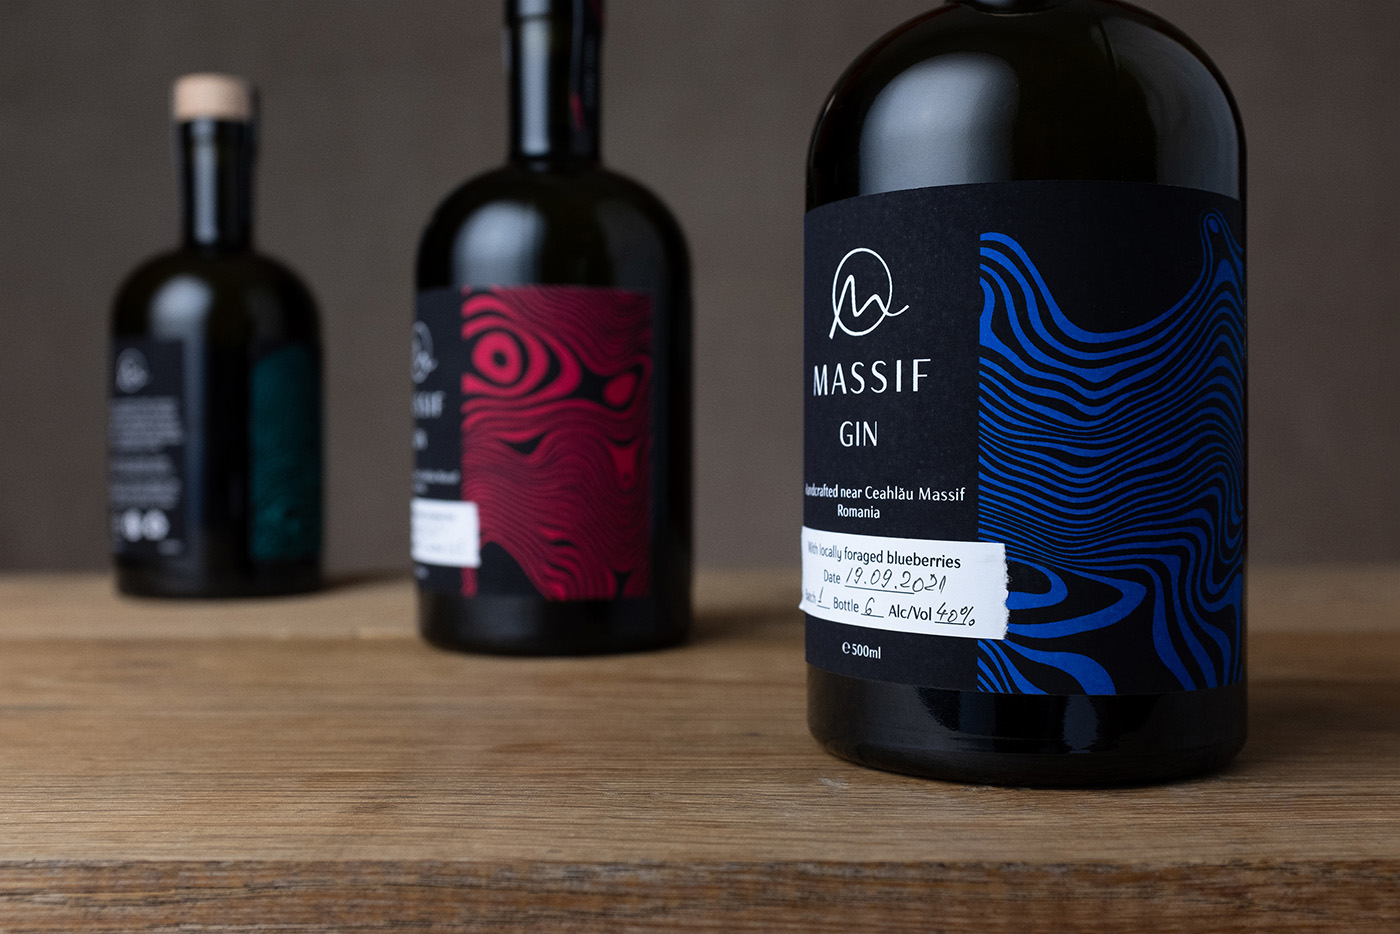 Romanian Massif Gin Designed by Stefan Andries